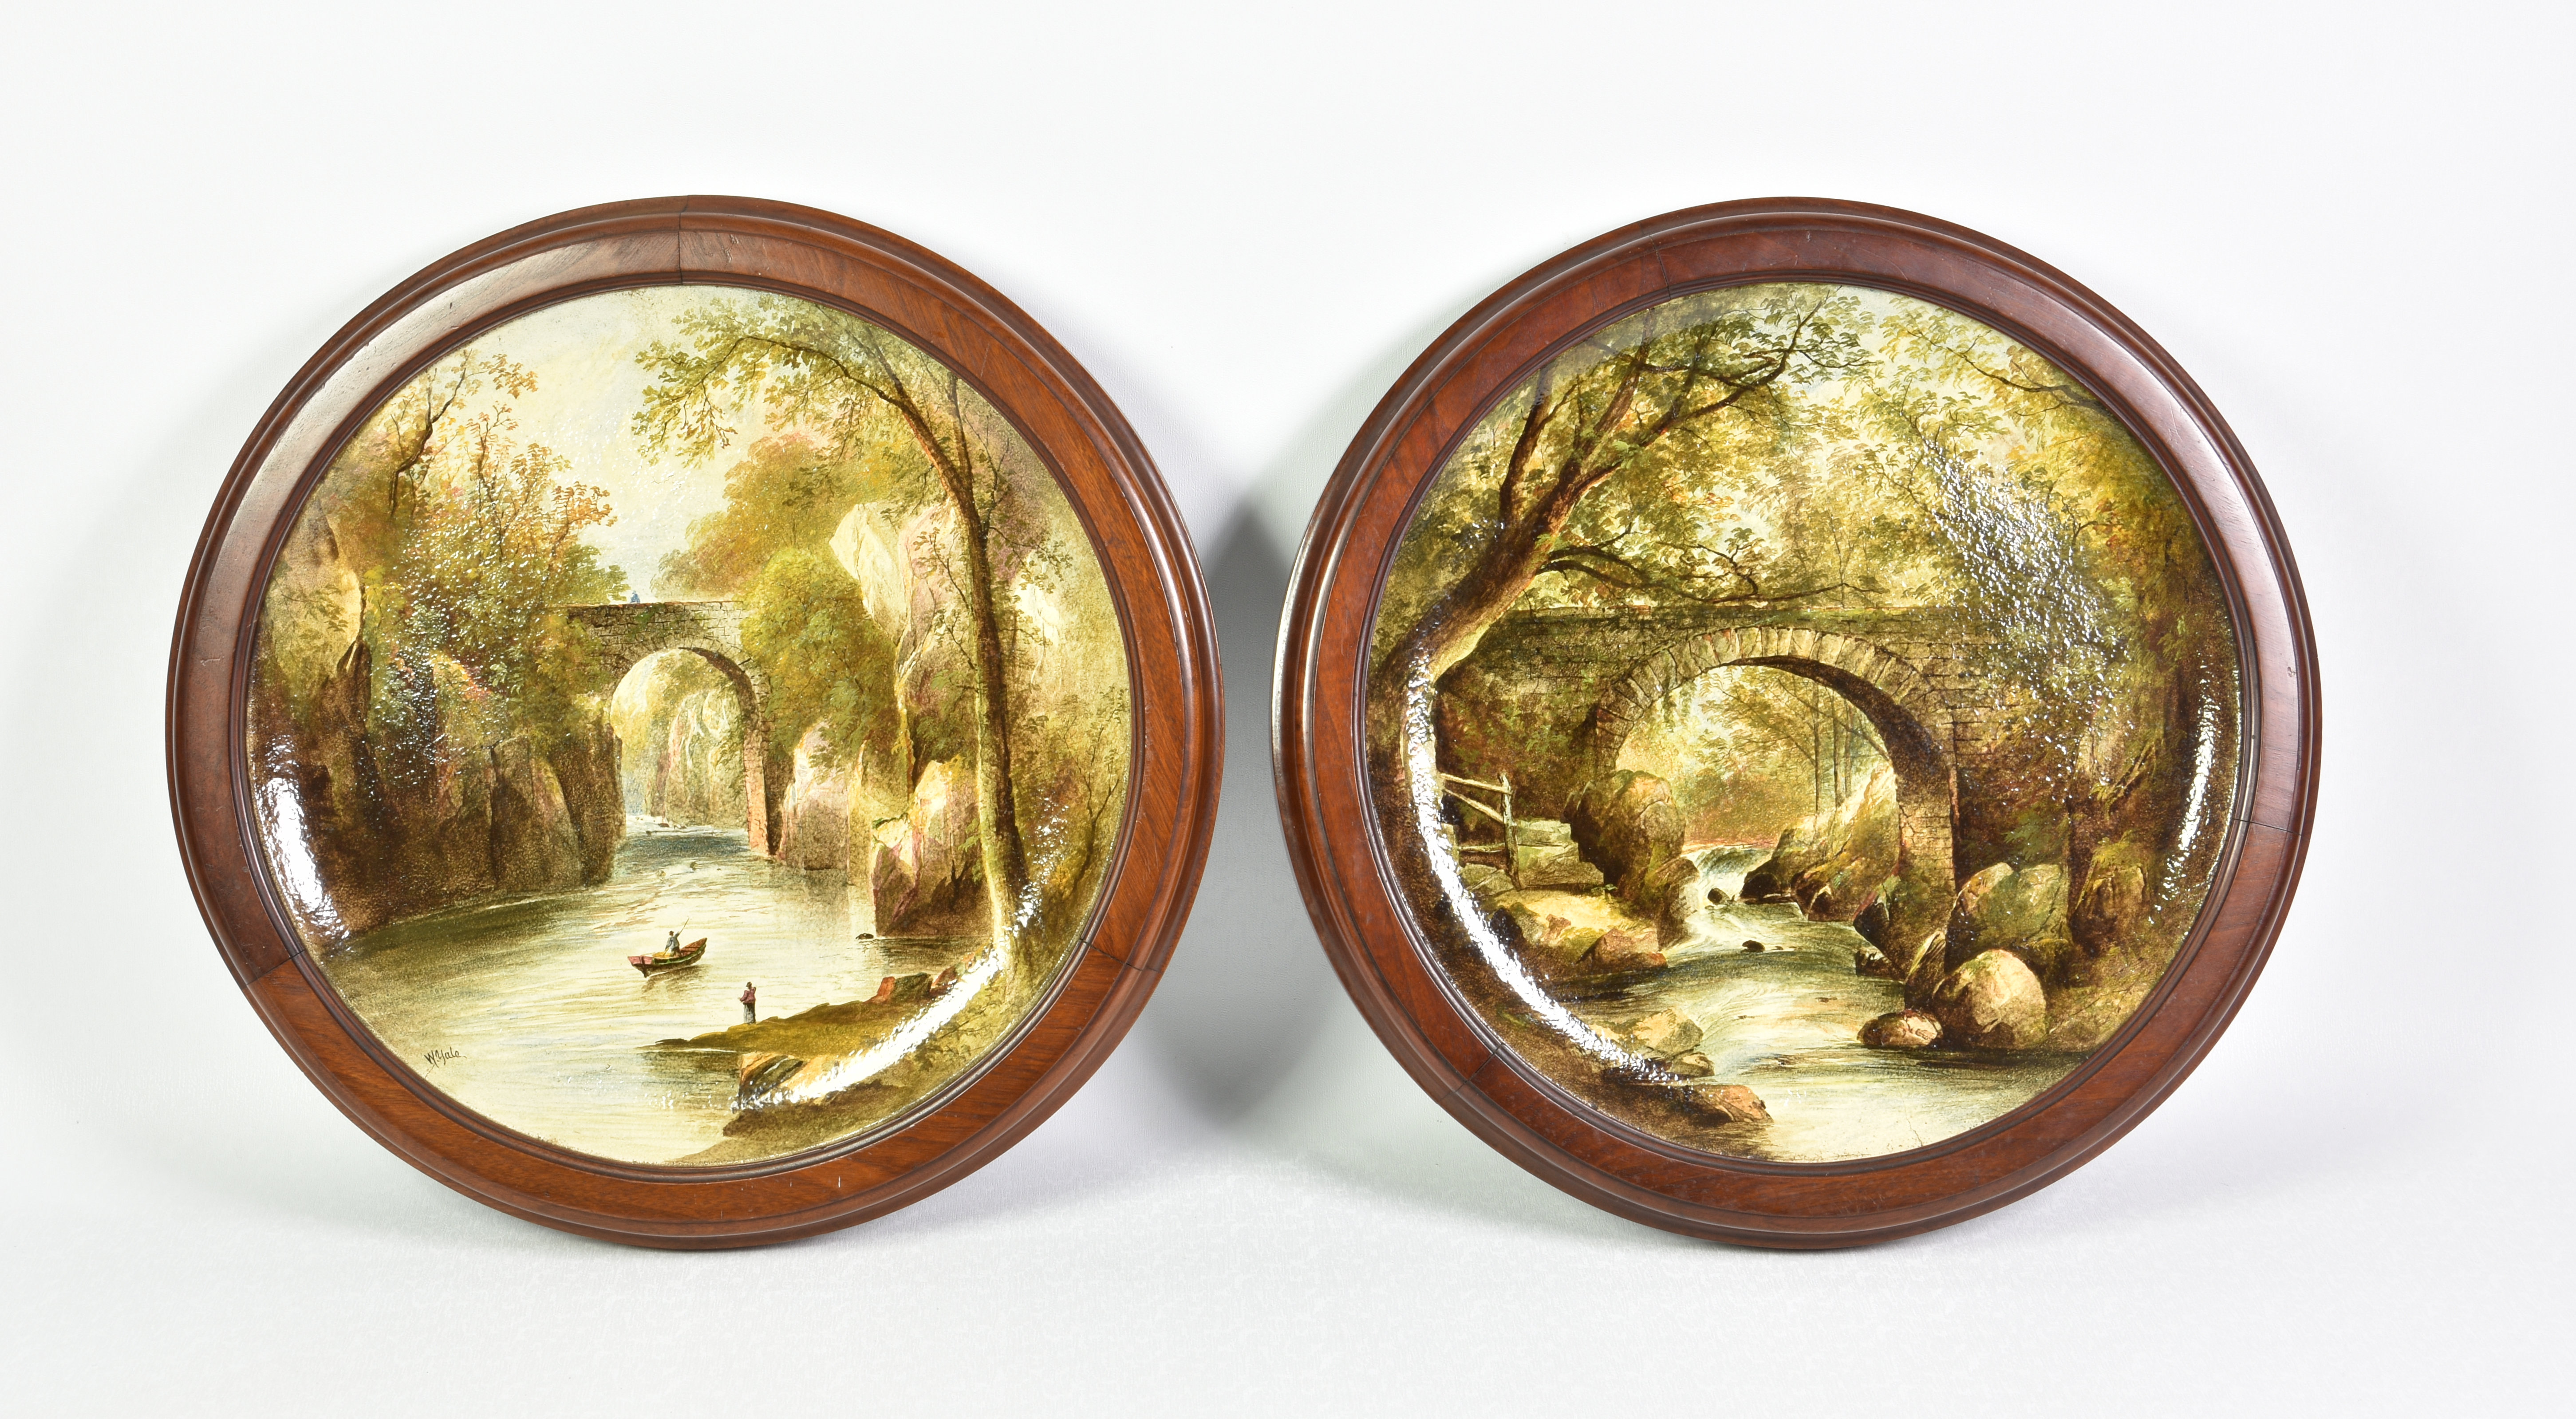 A pair of Copeland Spode Chargers in wooden circular frames, probably concealing marks and titles on